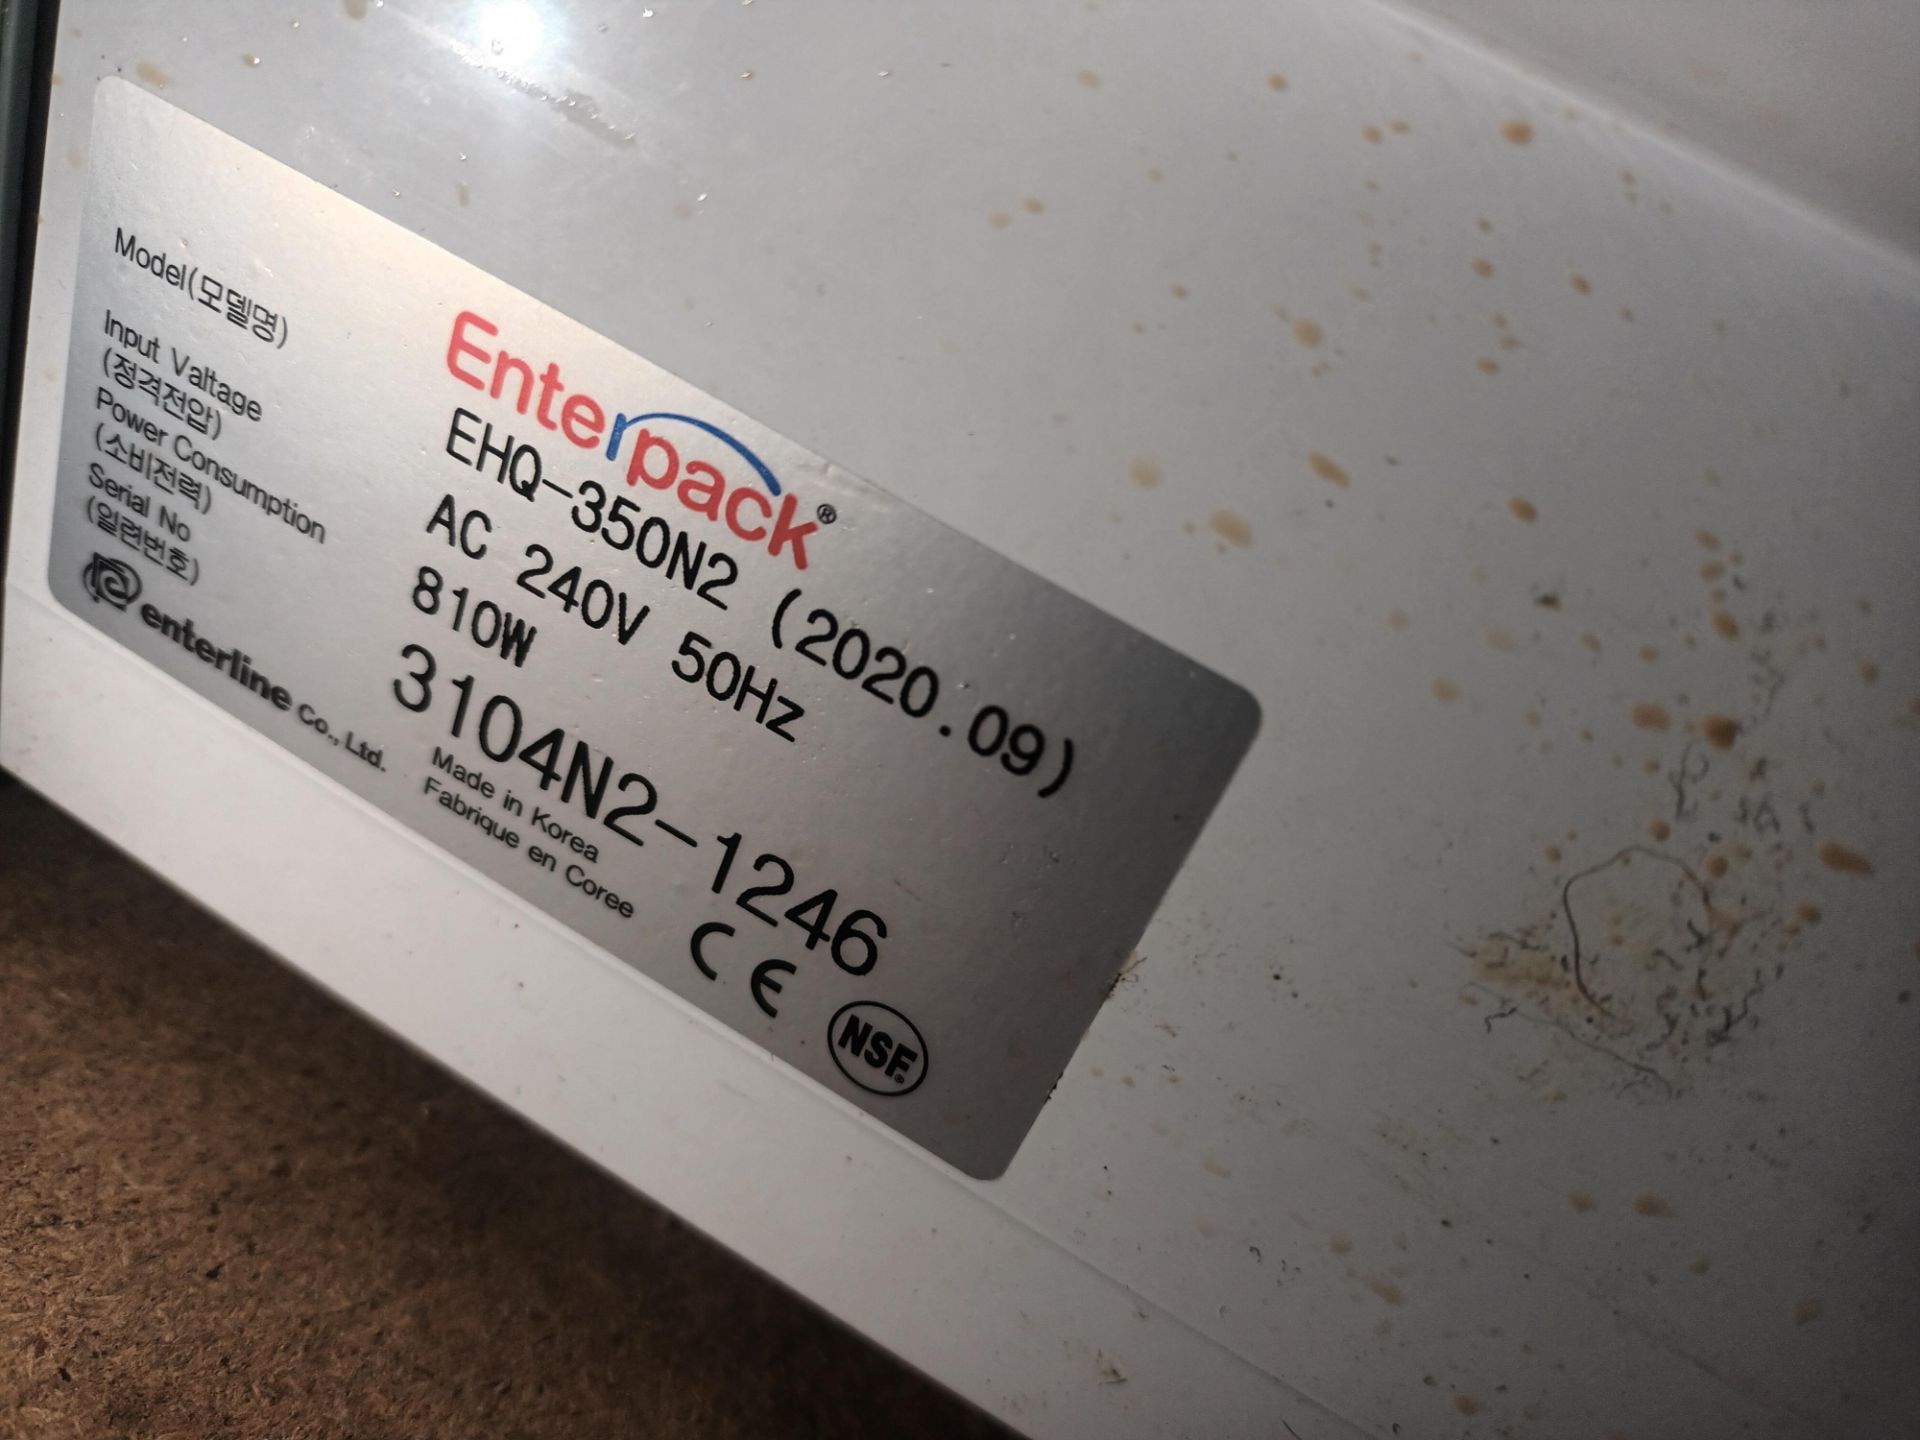 Enterpack EHQ350N2 automatic top sealing machine (Located Billericay) - Image 2 of 2